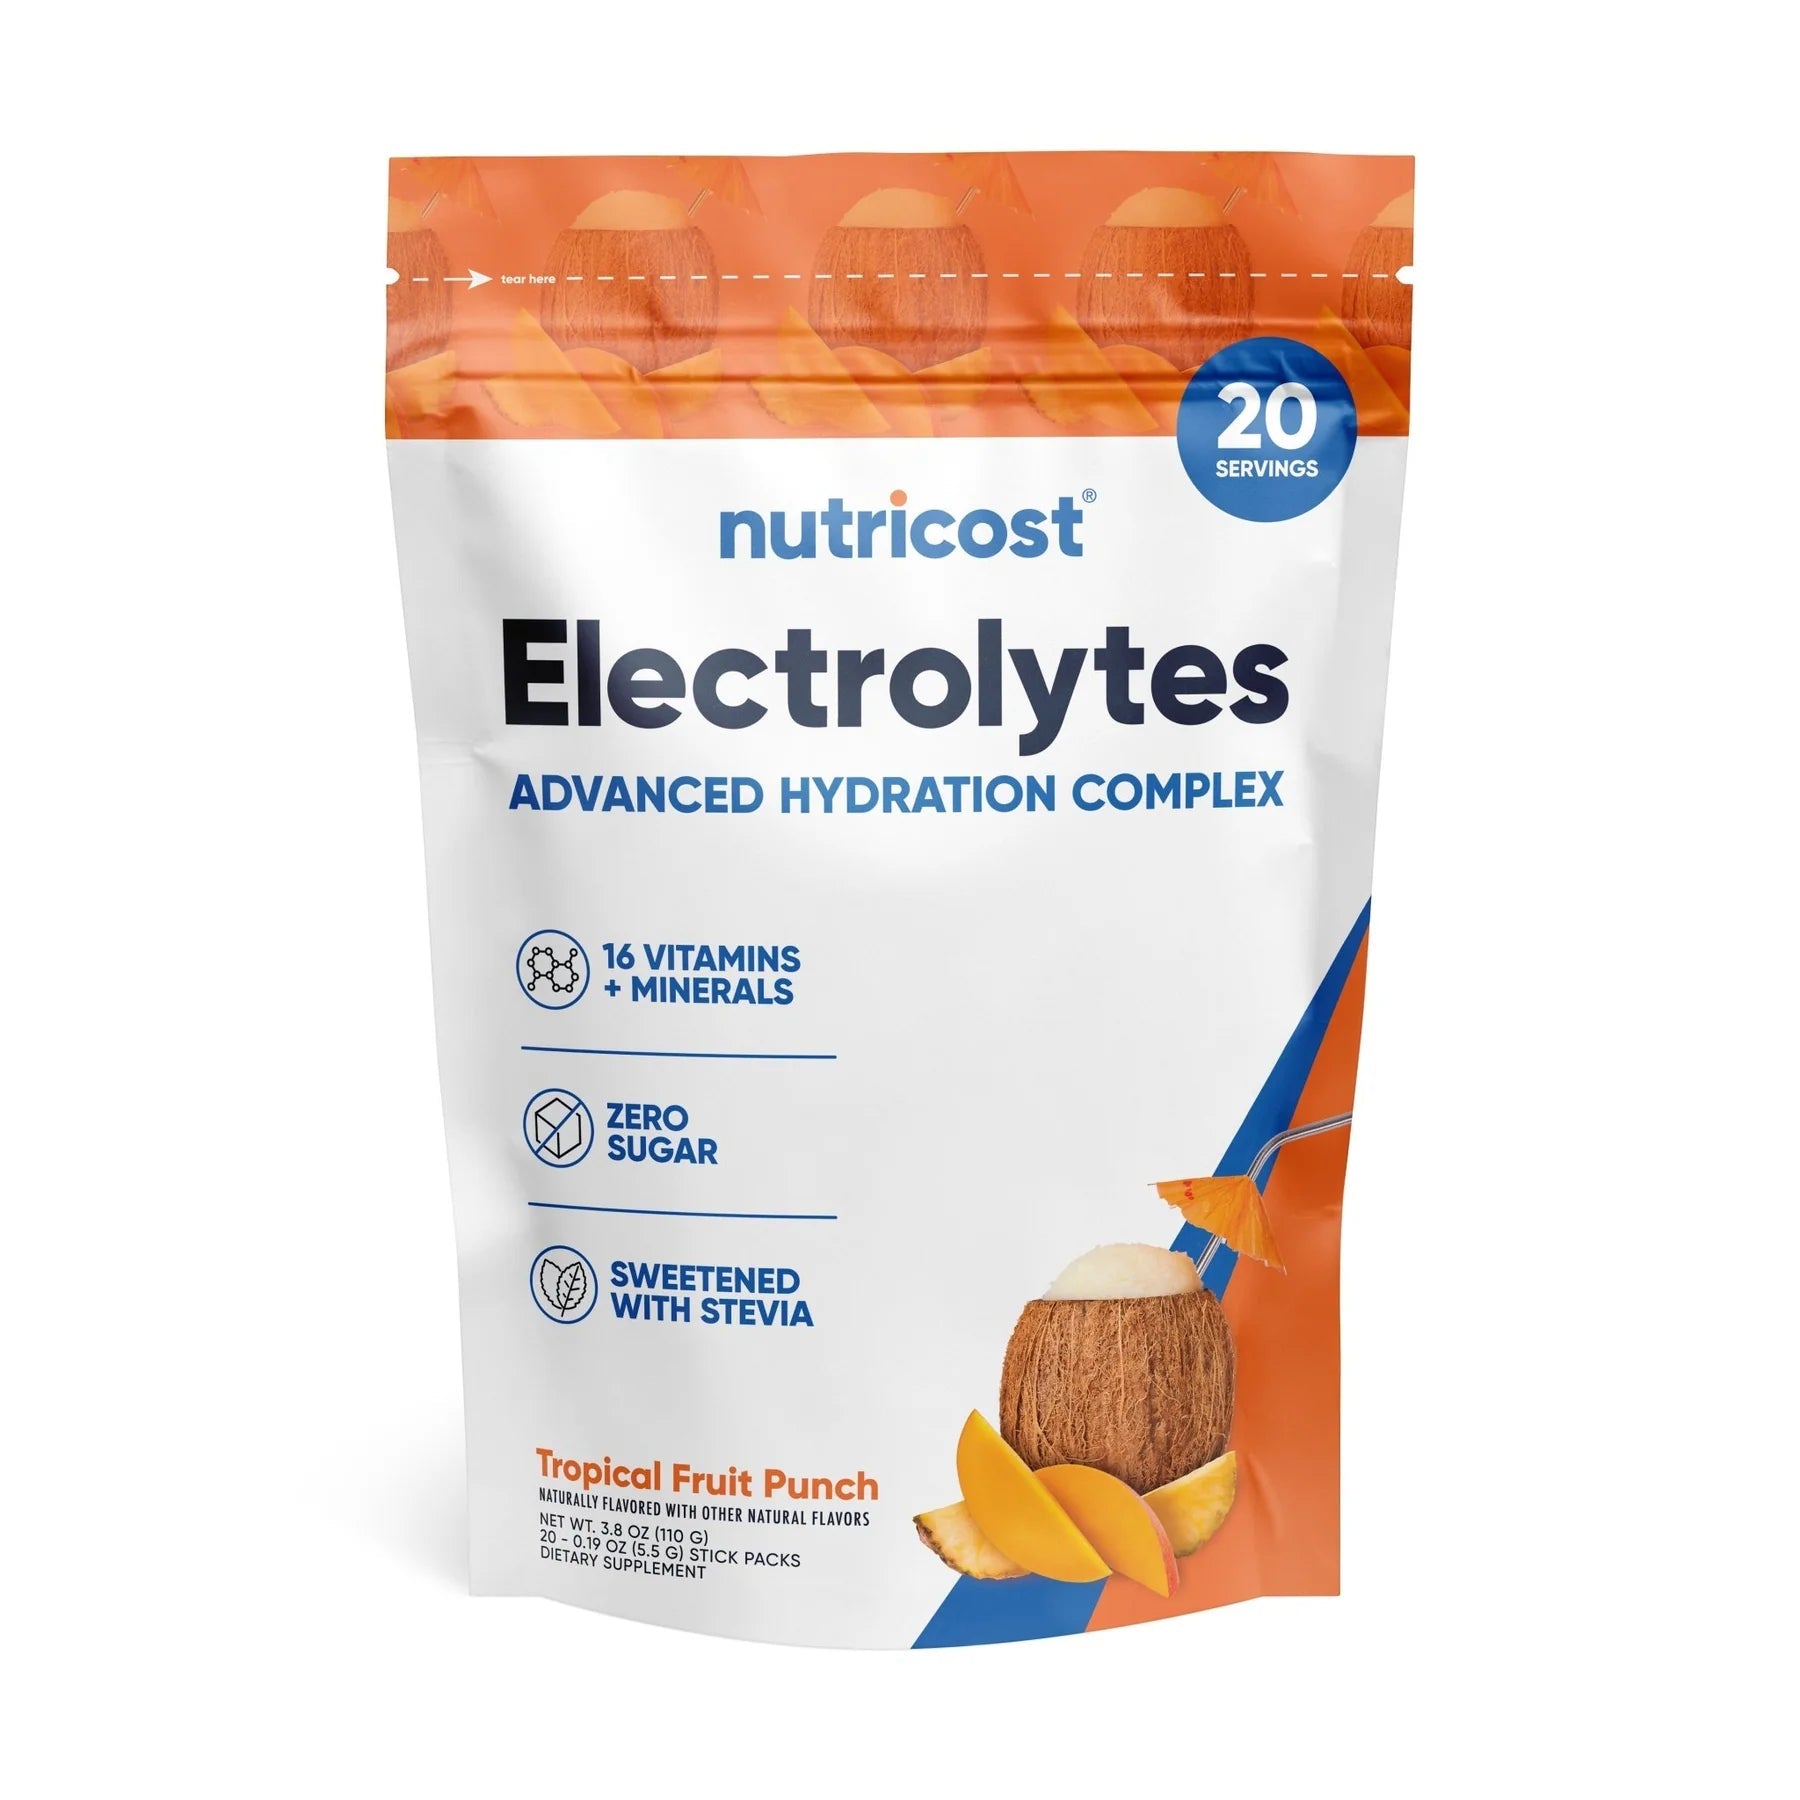 Nutricost Electrolytes Powder Hydration Packets Zero Sugar Low Calorie Keto Gluten Free 20 Packets - Tropical Fruit Punch